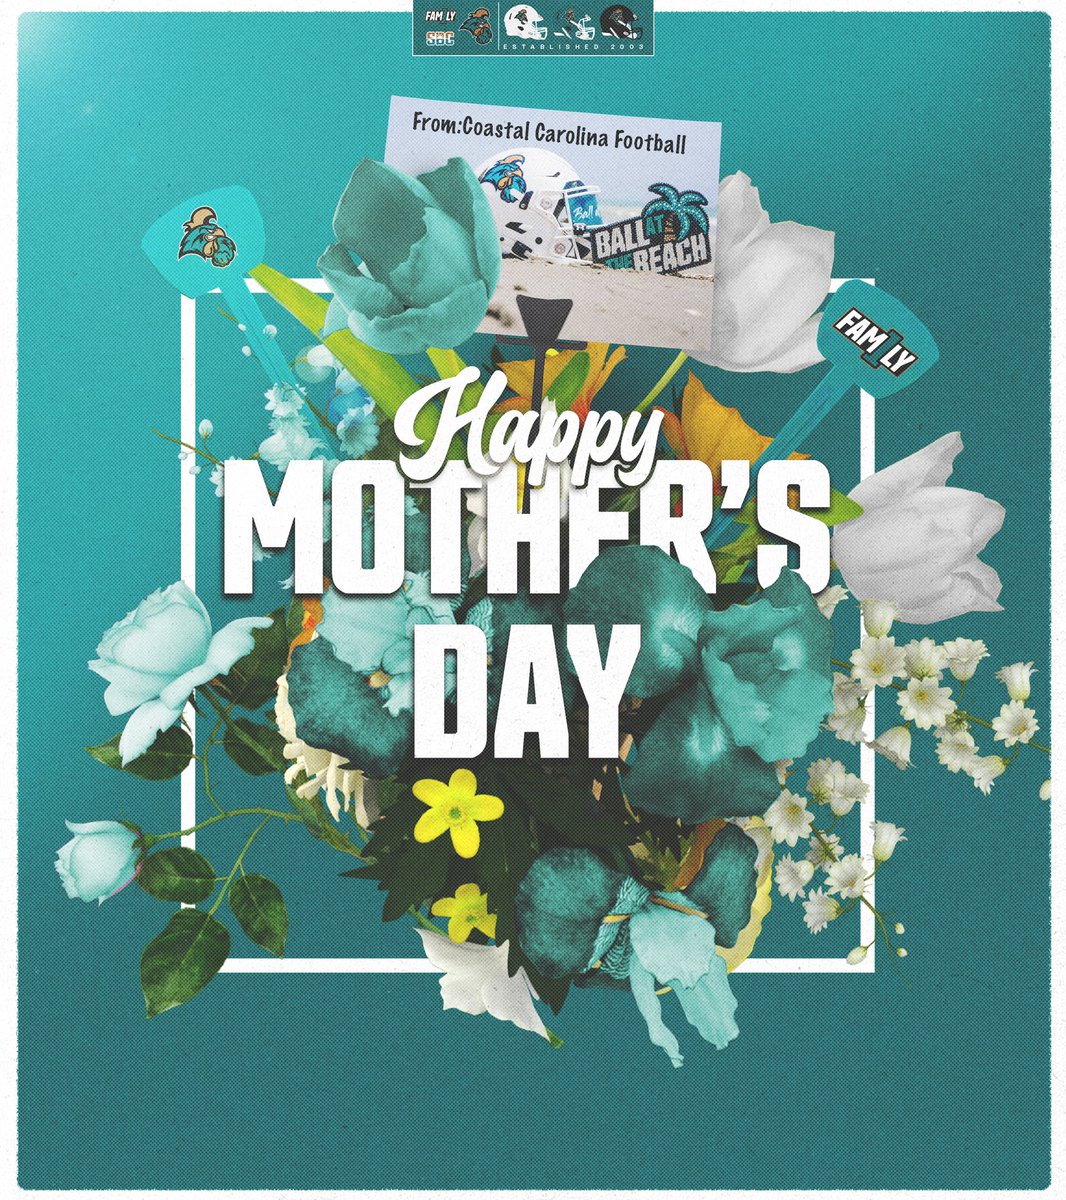 For loving us. For teaching us. For being our No. 1 fans. Happy Mother’s Day to all the amazing Chanticleer moms out there! #BALLATTHEBEACH | #FAM1LY | #TEALNATION